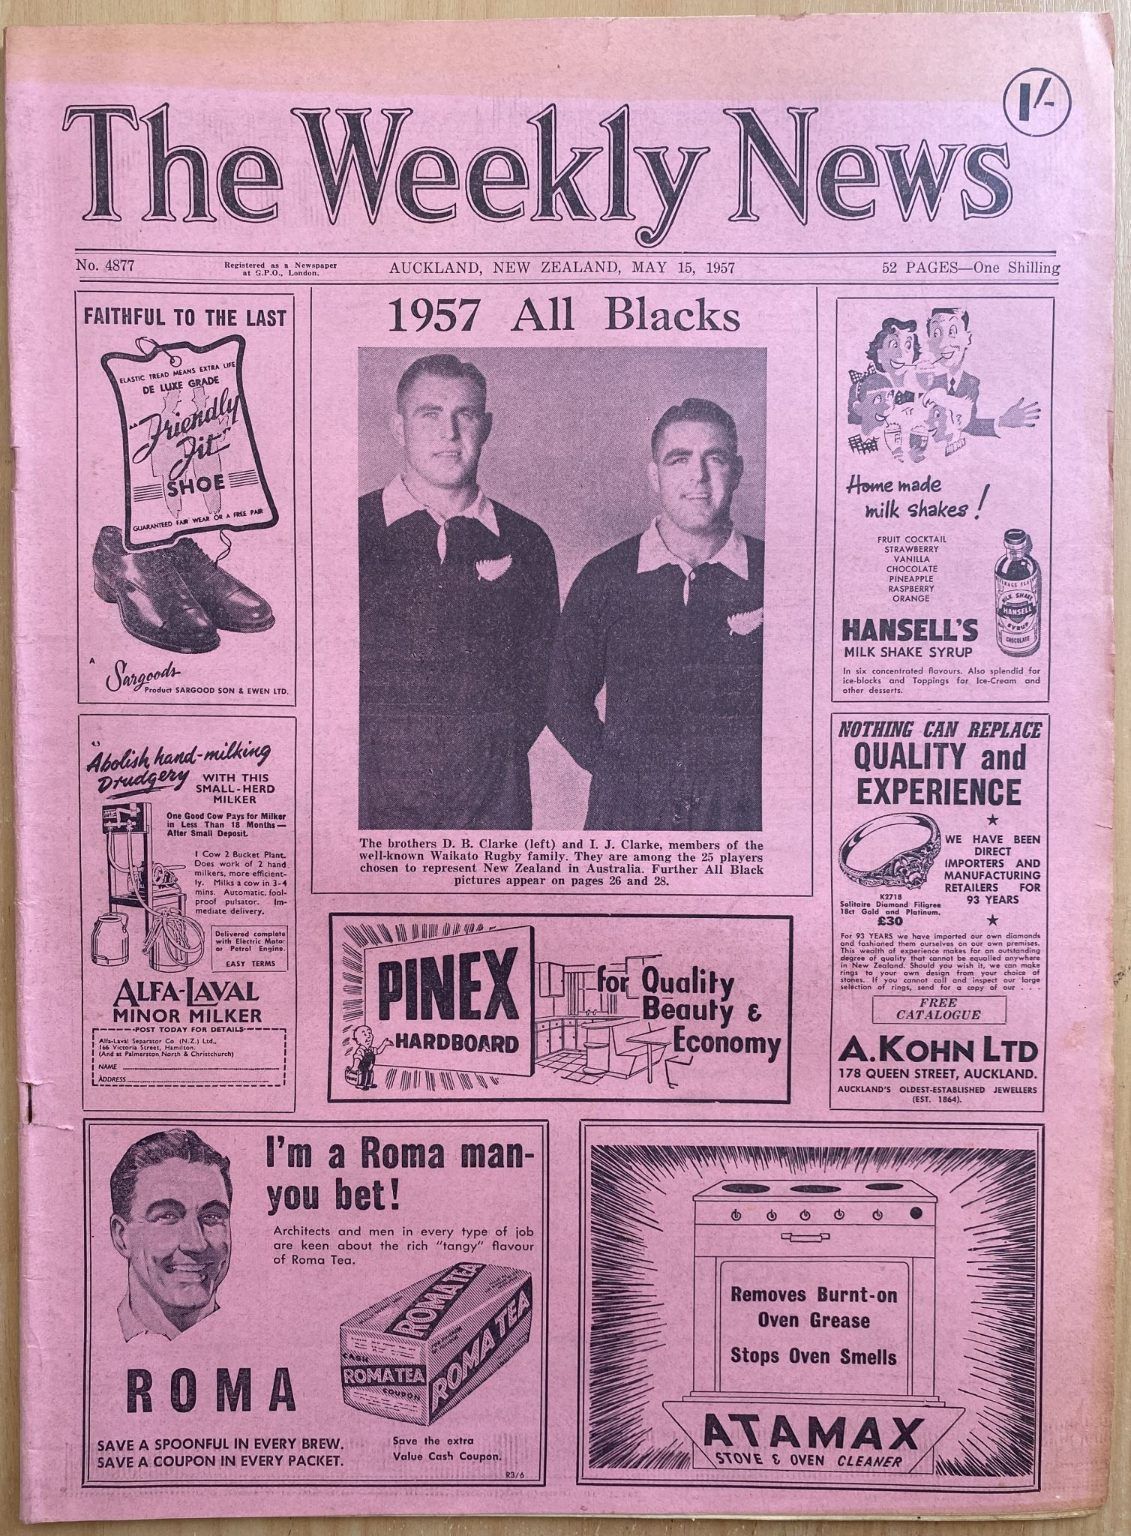 OLD NEWSPAPER: The Weekly News, No. 4877, 15 May 1957